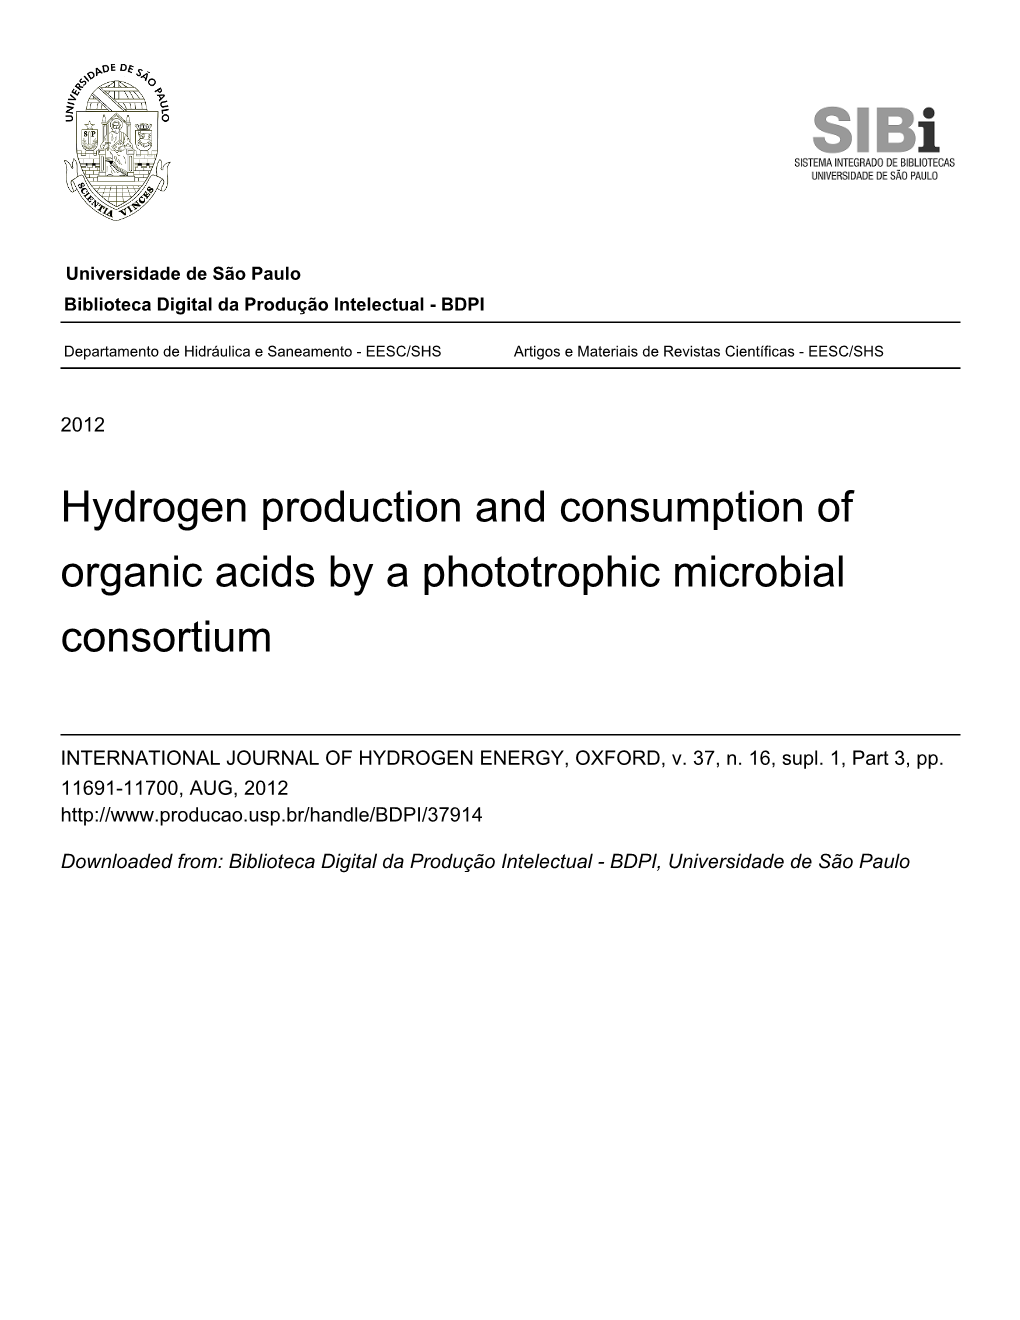 Hydrogen Production and Consumption of Organic Acids by a Phototrophic Microbial Consortium